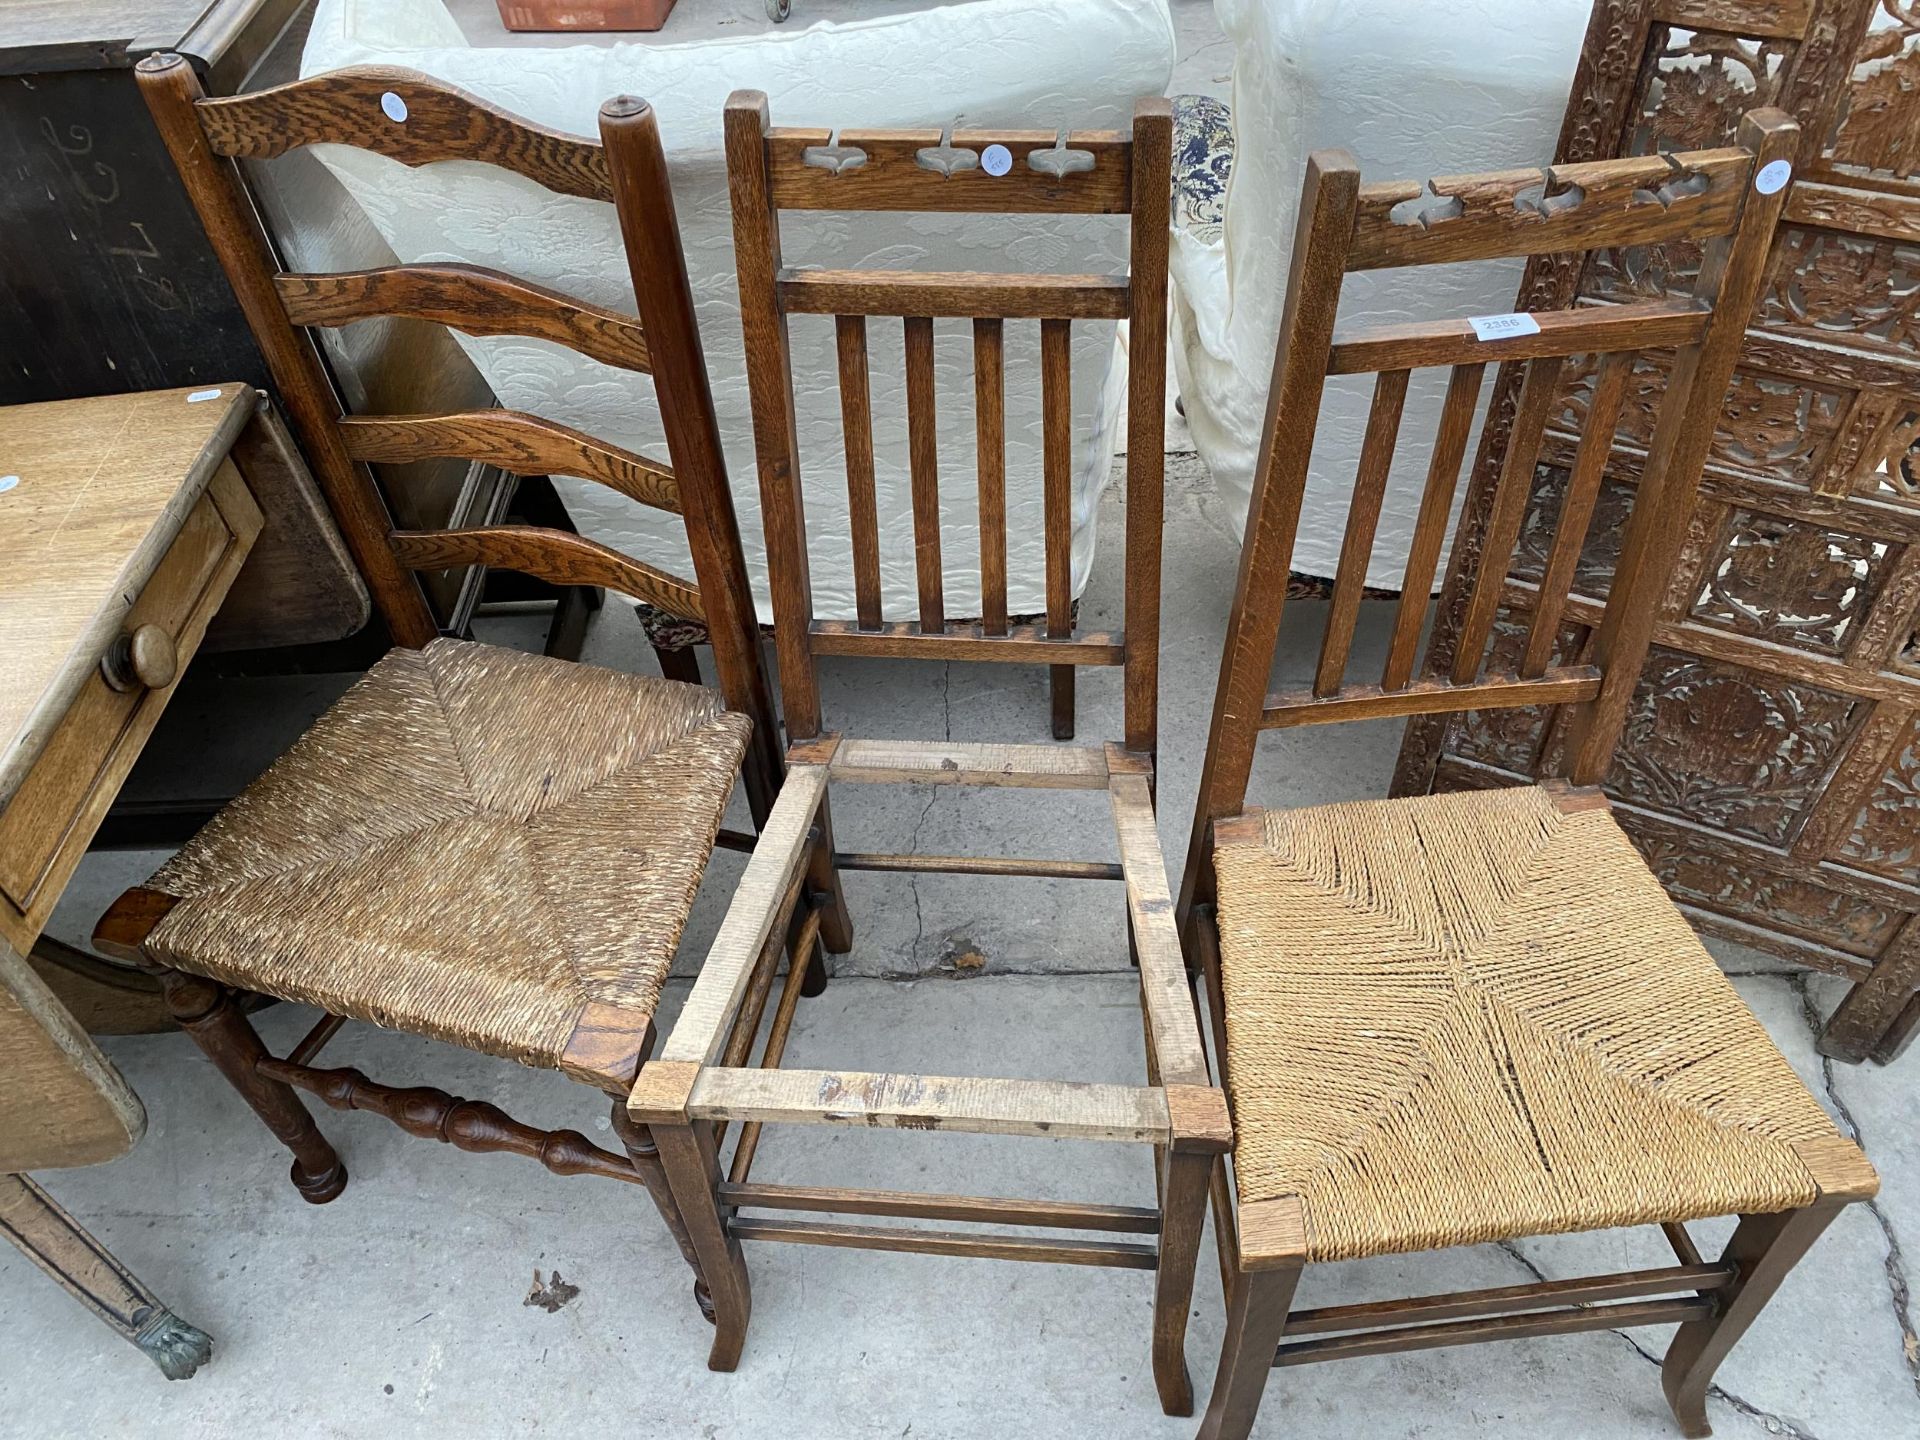 A PAIR OF OAK ARTS & CRAFTS BEDROOM CHAIRS AND LANCASHIRE LADDERBACK CHAIR